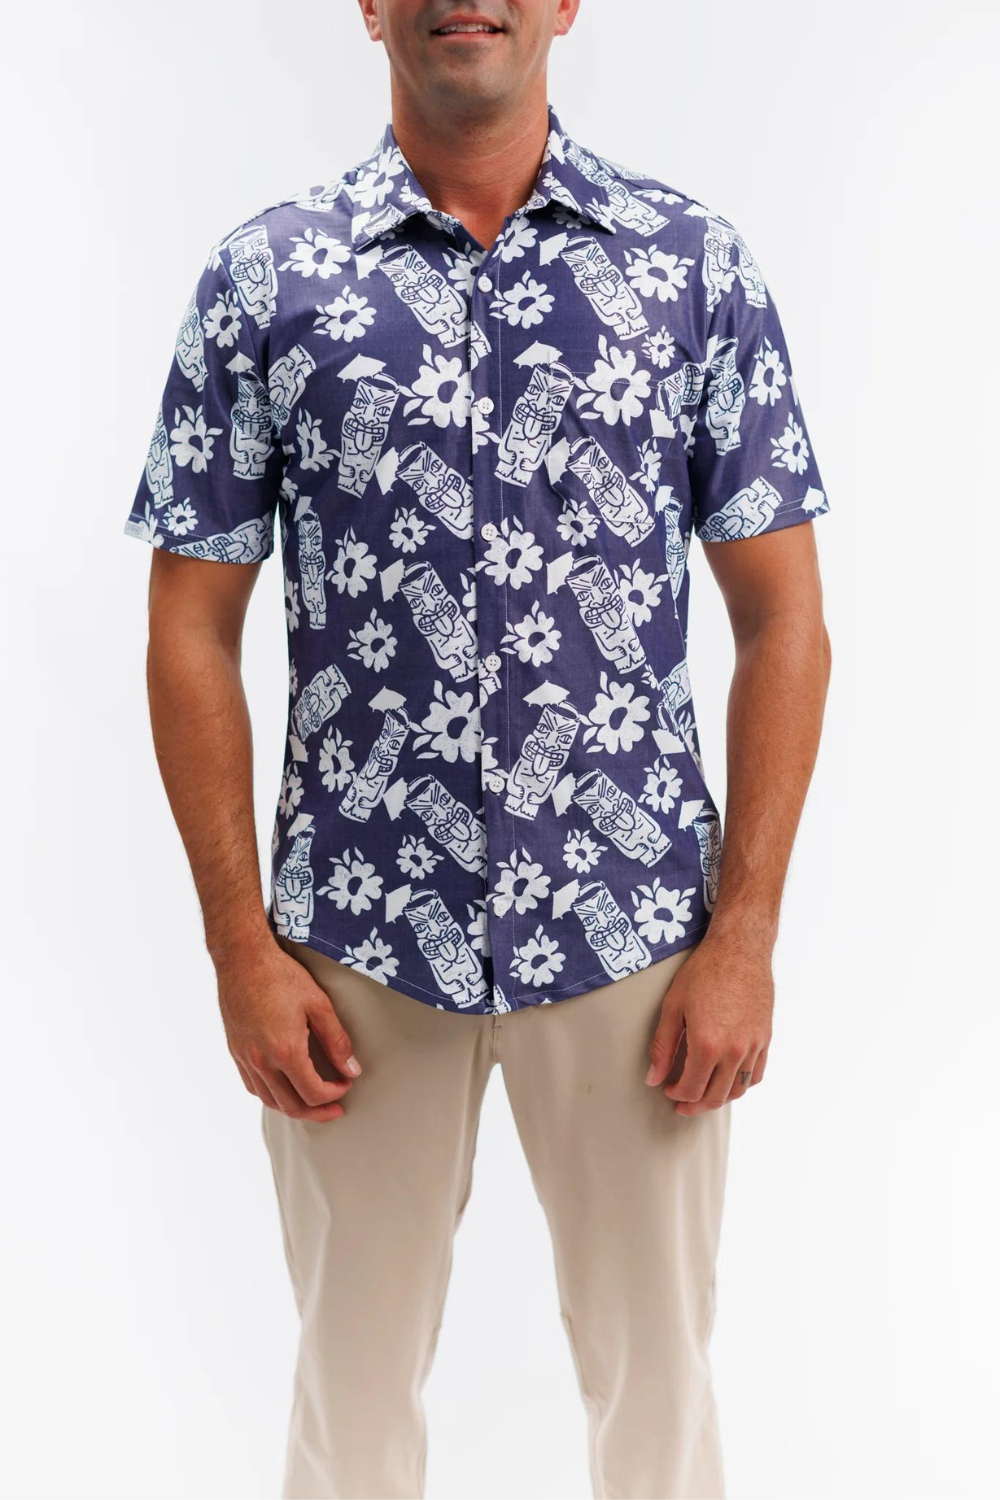 Smith & Quinn Boatyard Button Down - Tiki Torched Large